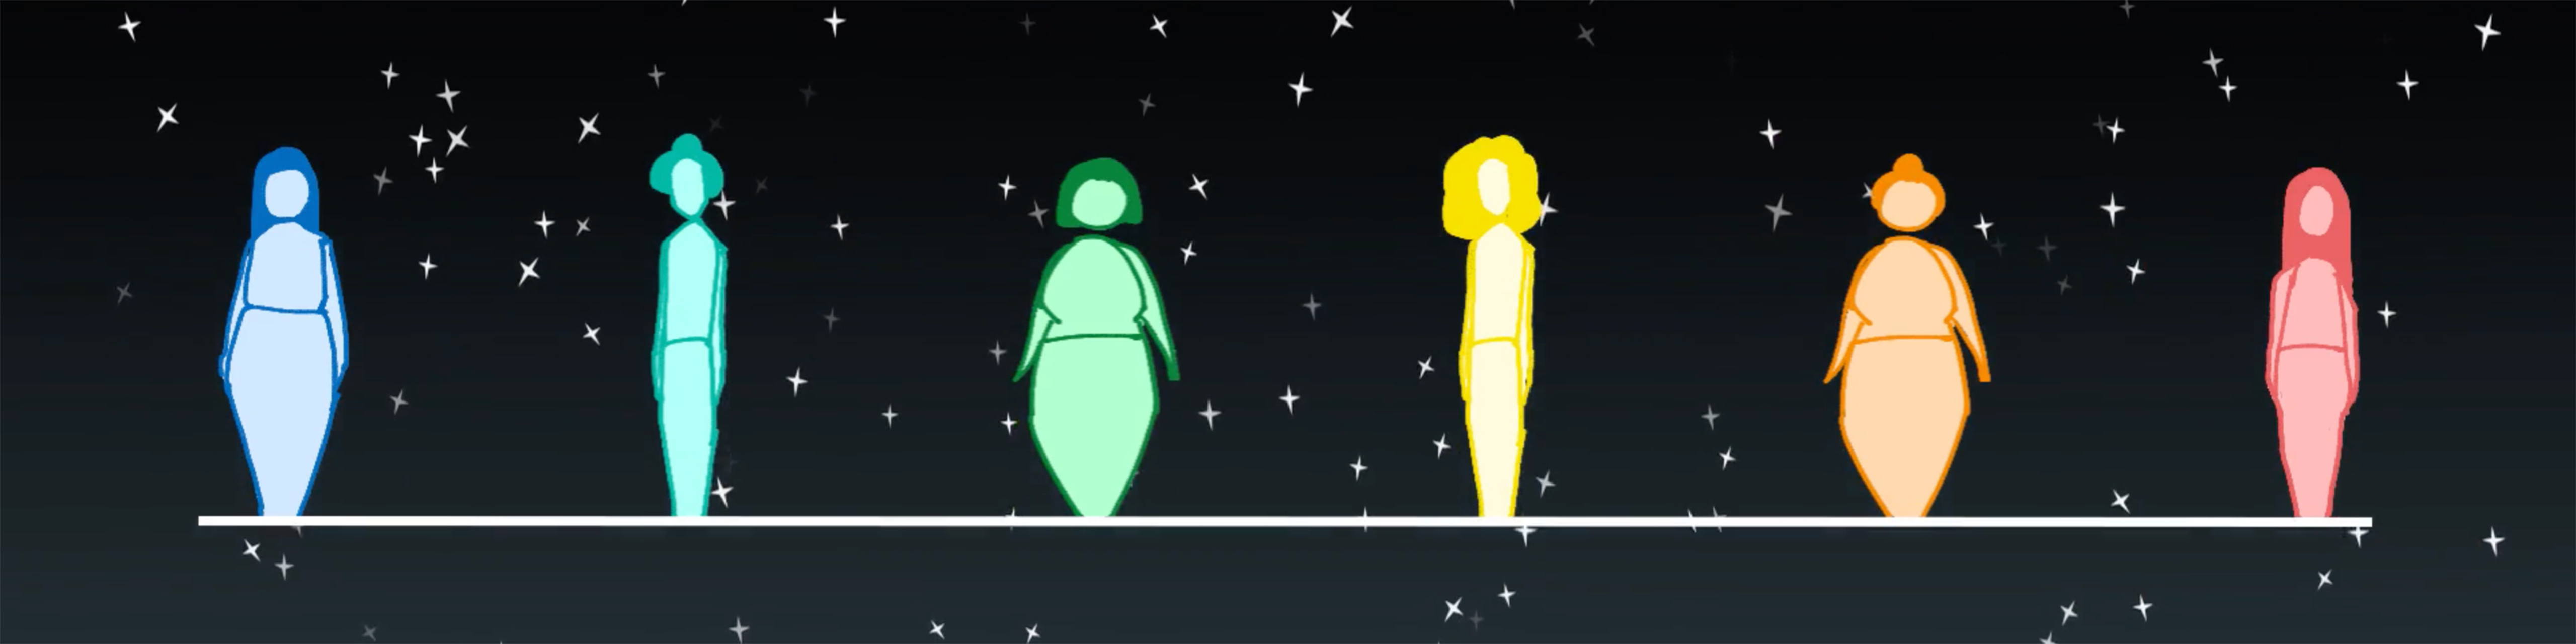 Illustration of six women of different cultures against a starfield background